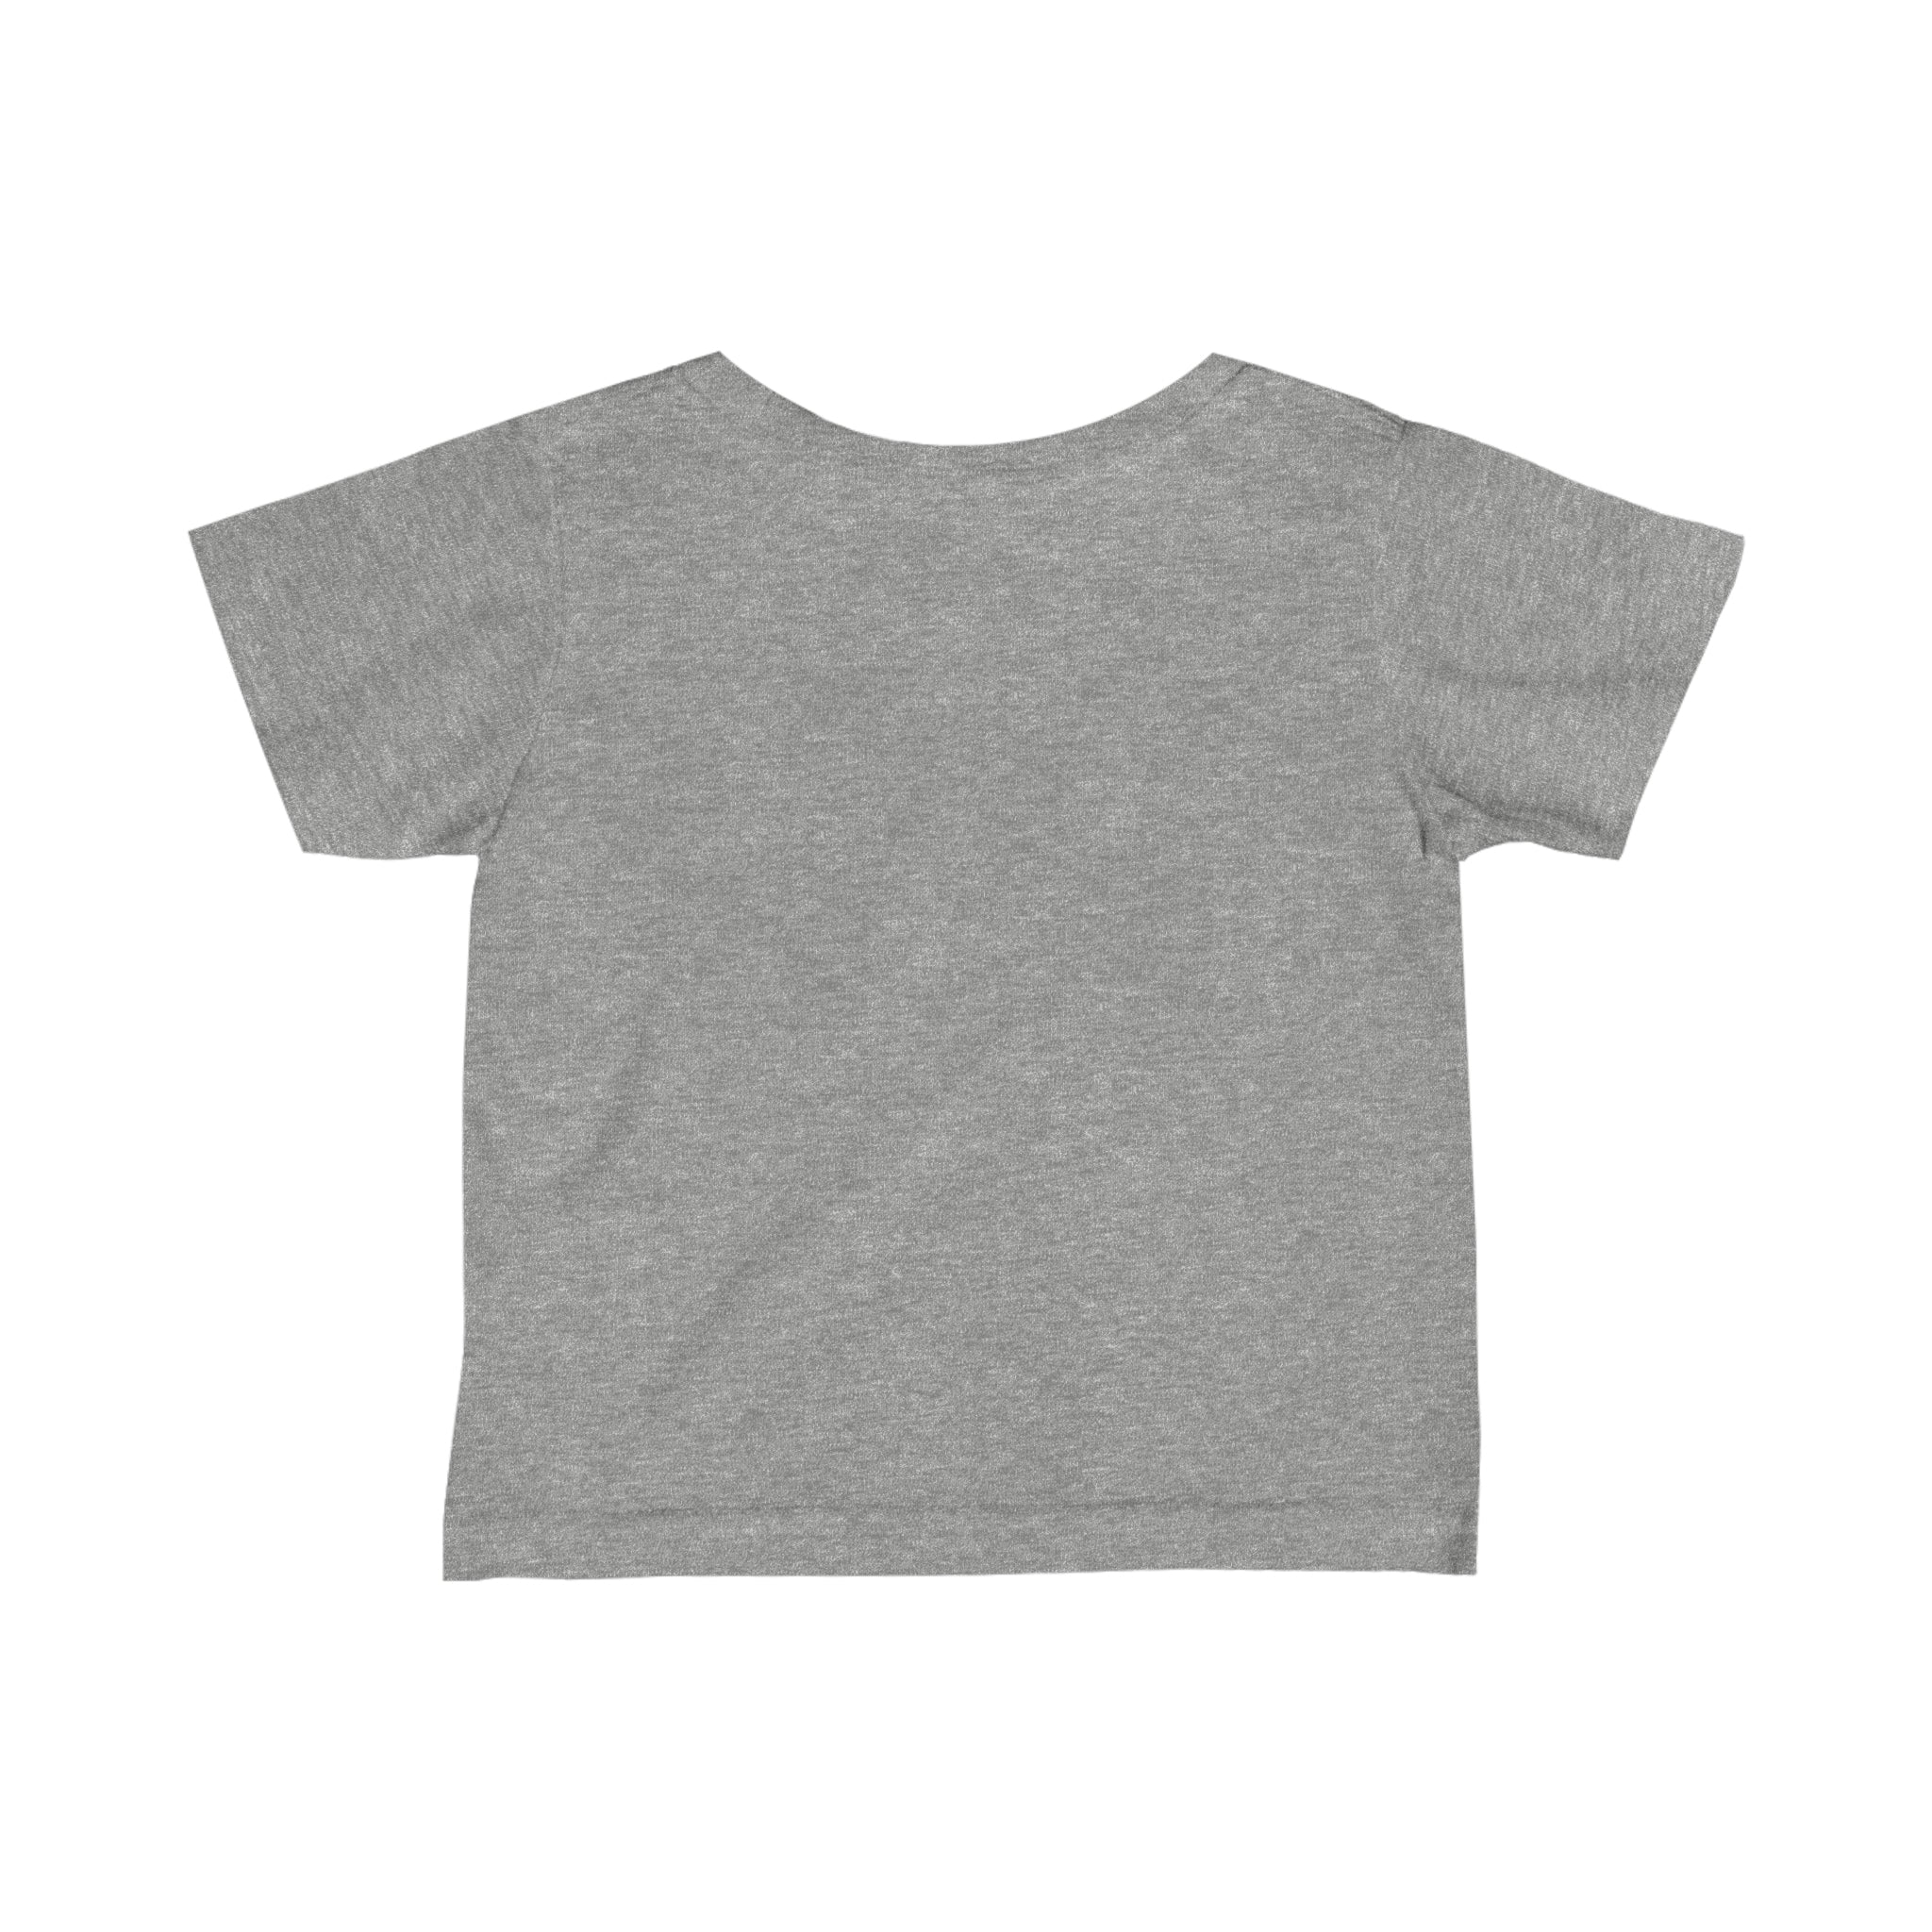 Minerallymade | Nourishing IQs Naturally | Infant Fine Jersey Tee